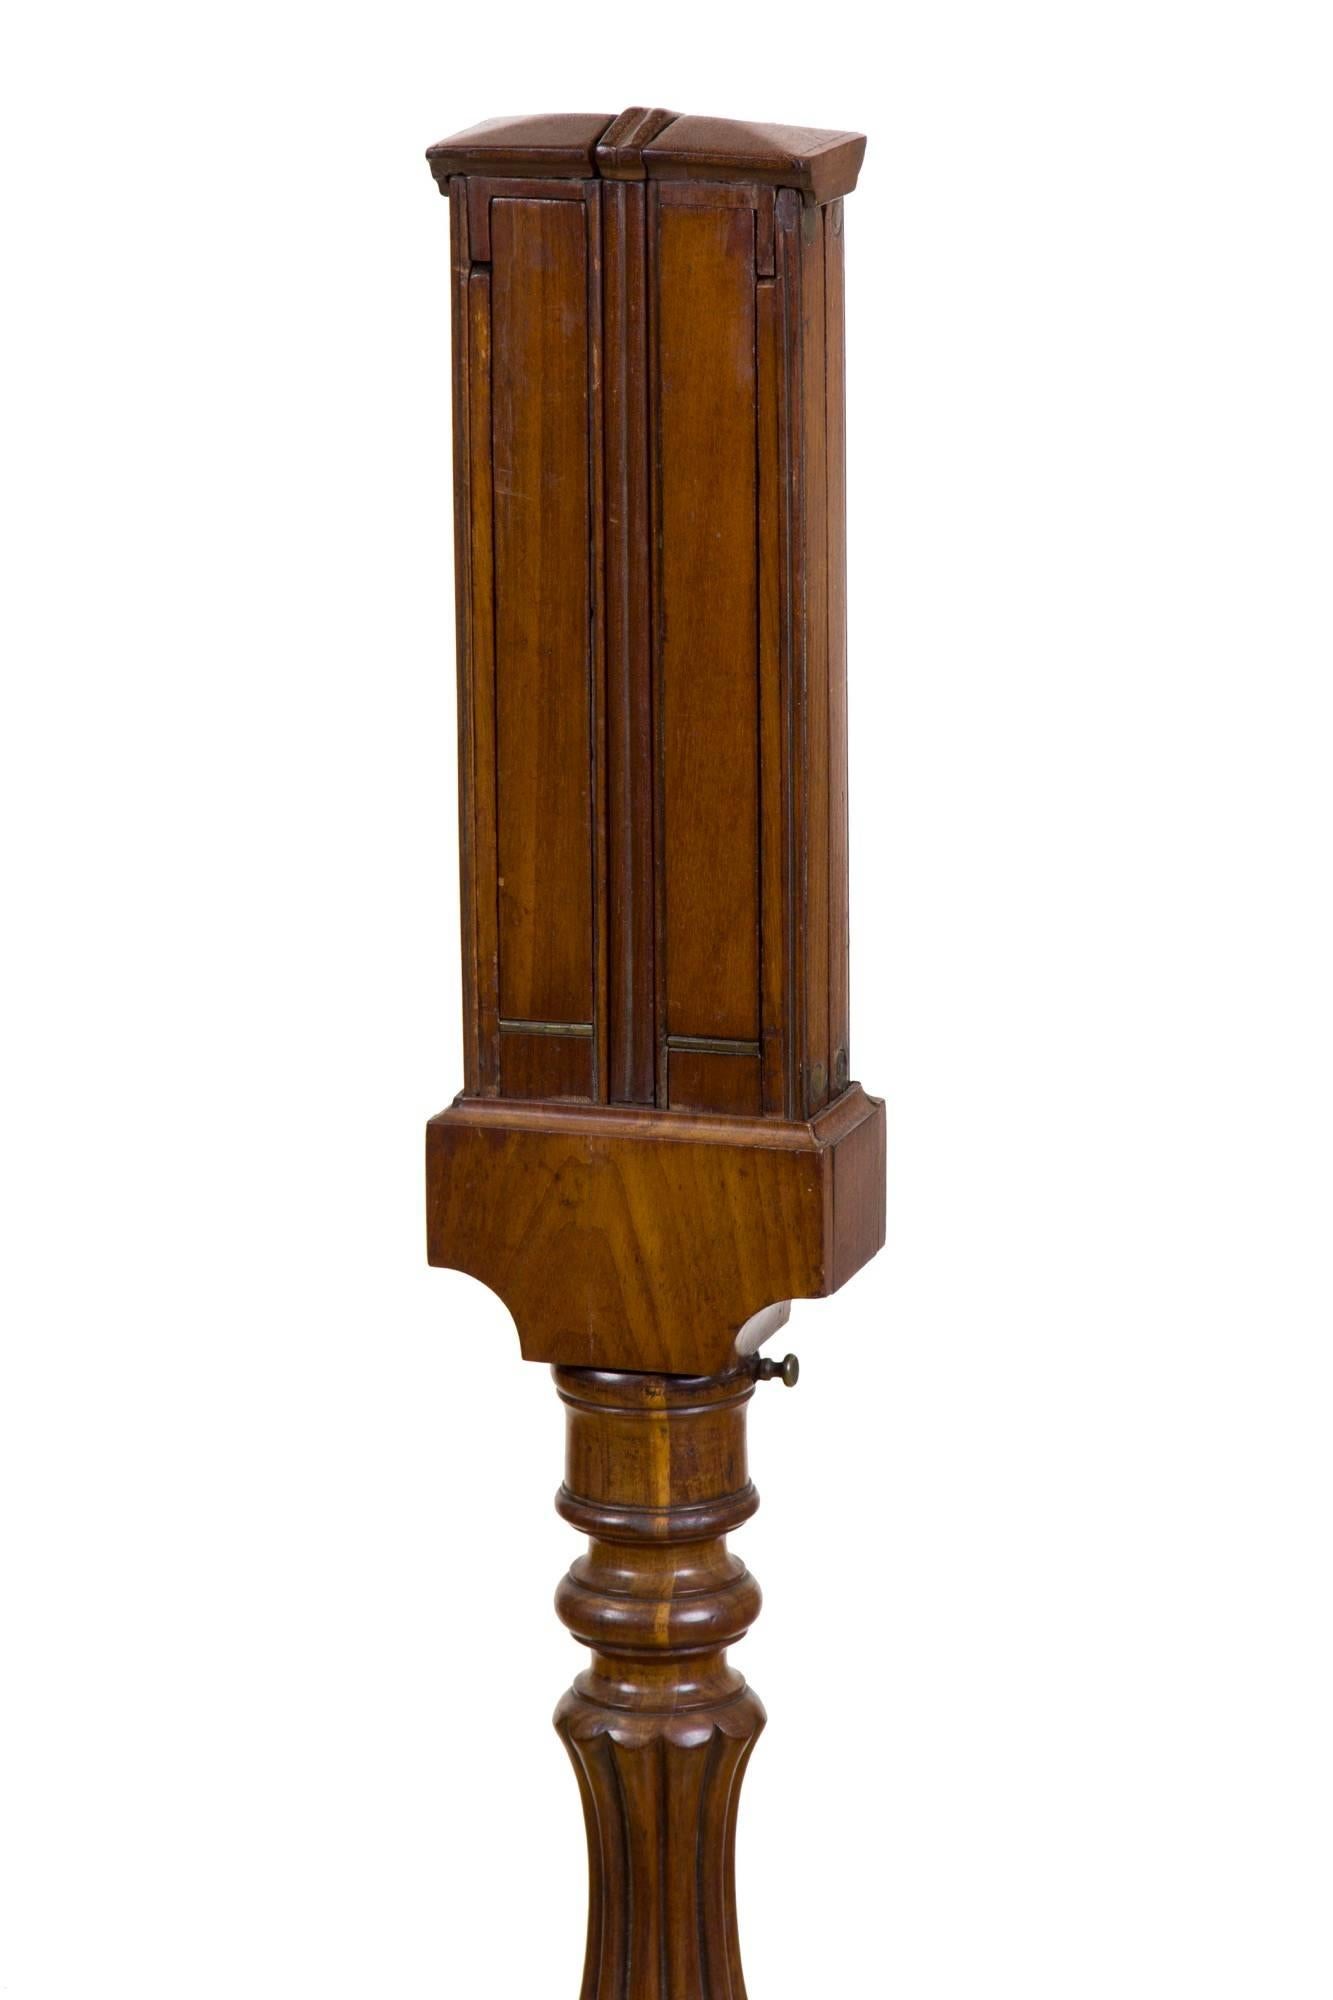 Rare Classical Mahogany Metamorphic Duet Musical Stand, Campaign Furniture In Excellent Condition For Sale In Providence, RI